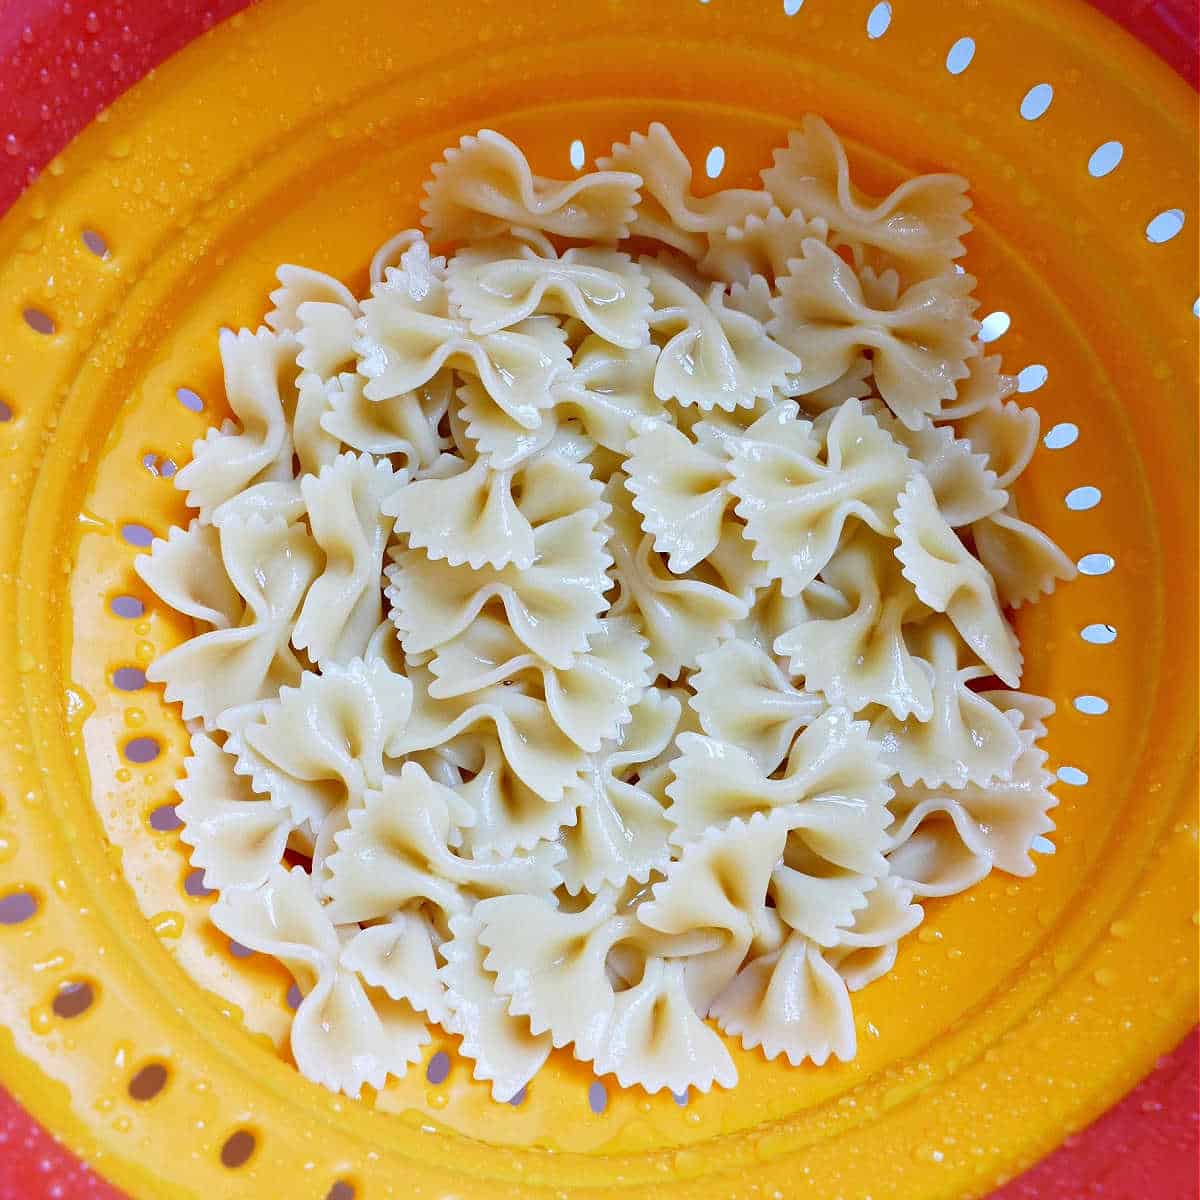 bowtie pasta being drained and rinsed in a colander in the sink